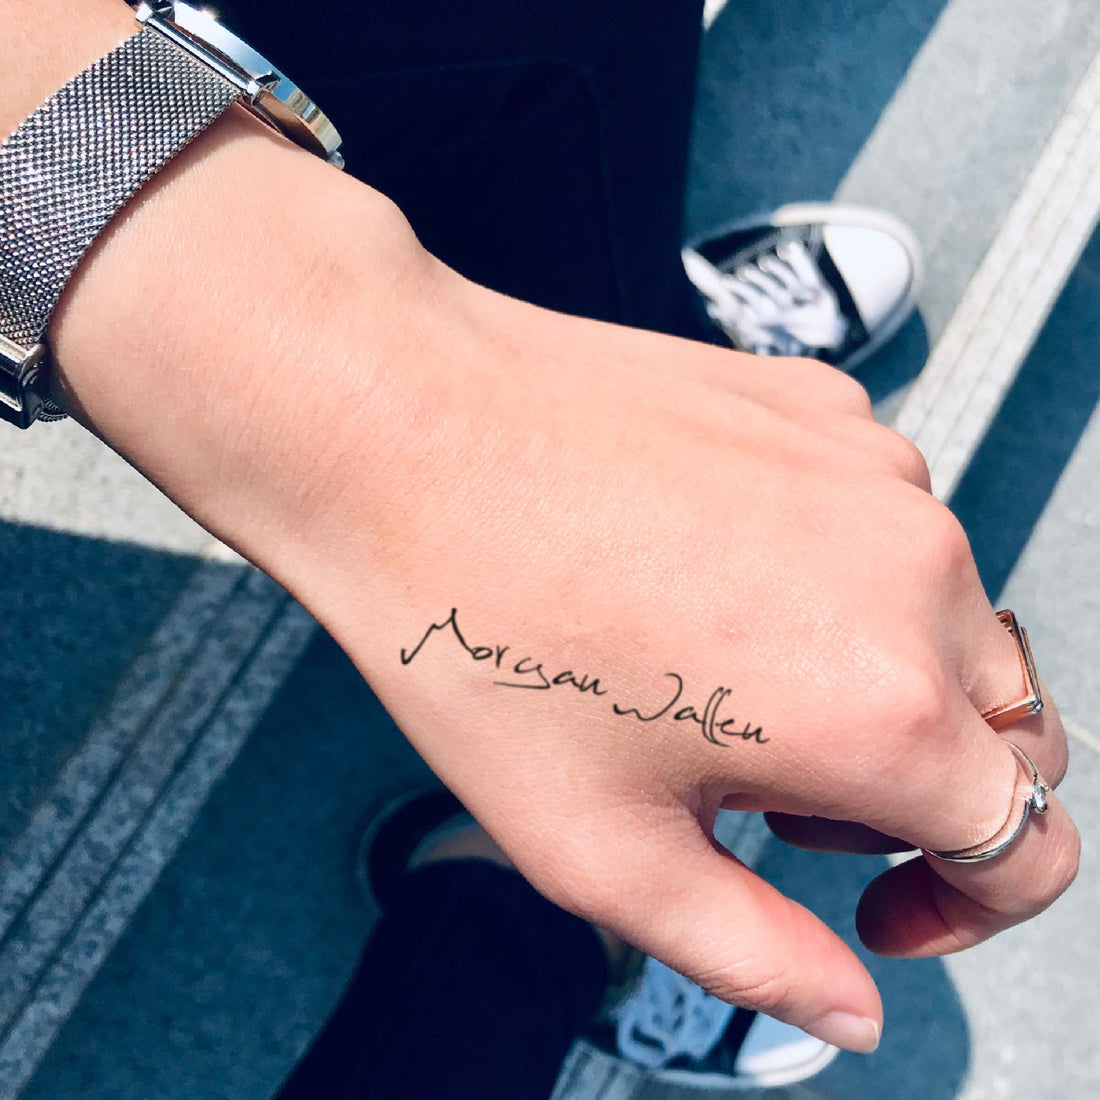 Morgan Wallen custom temporary tattoo sticker design idea inspiration meanings removal arm wrist hand words font name signature calligraphy lyrics tour concert outfits merch accessory gift souvenir costumes wear dress up code